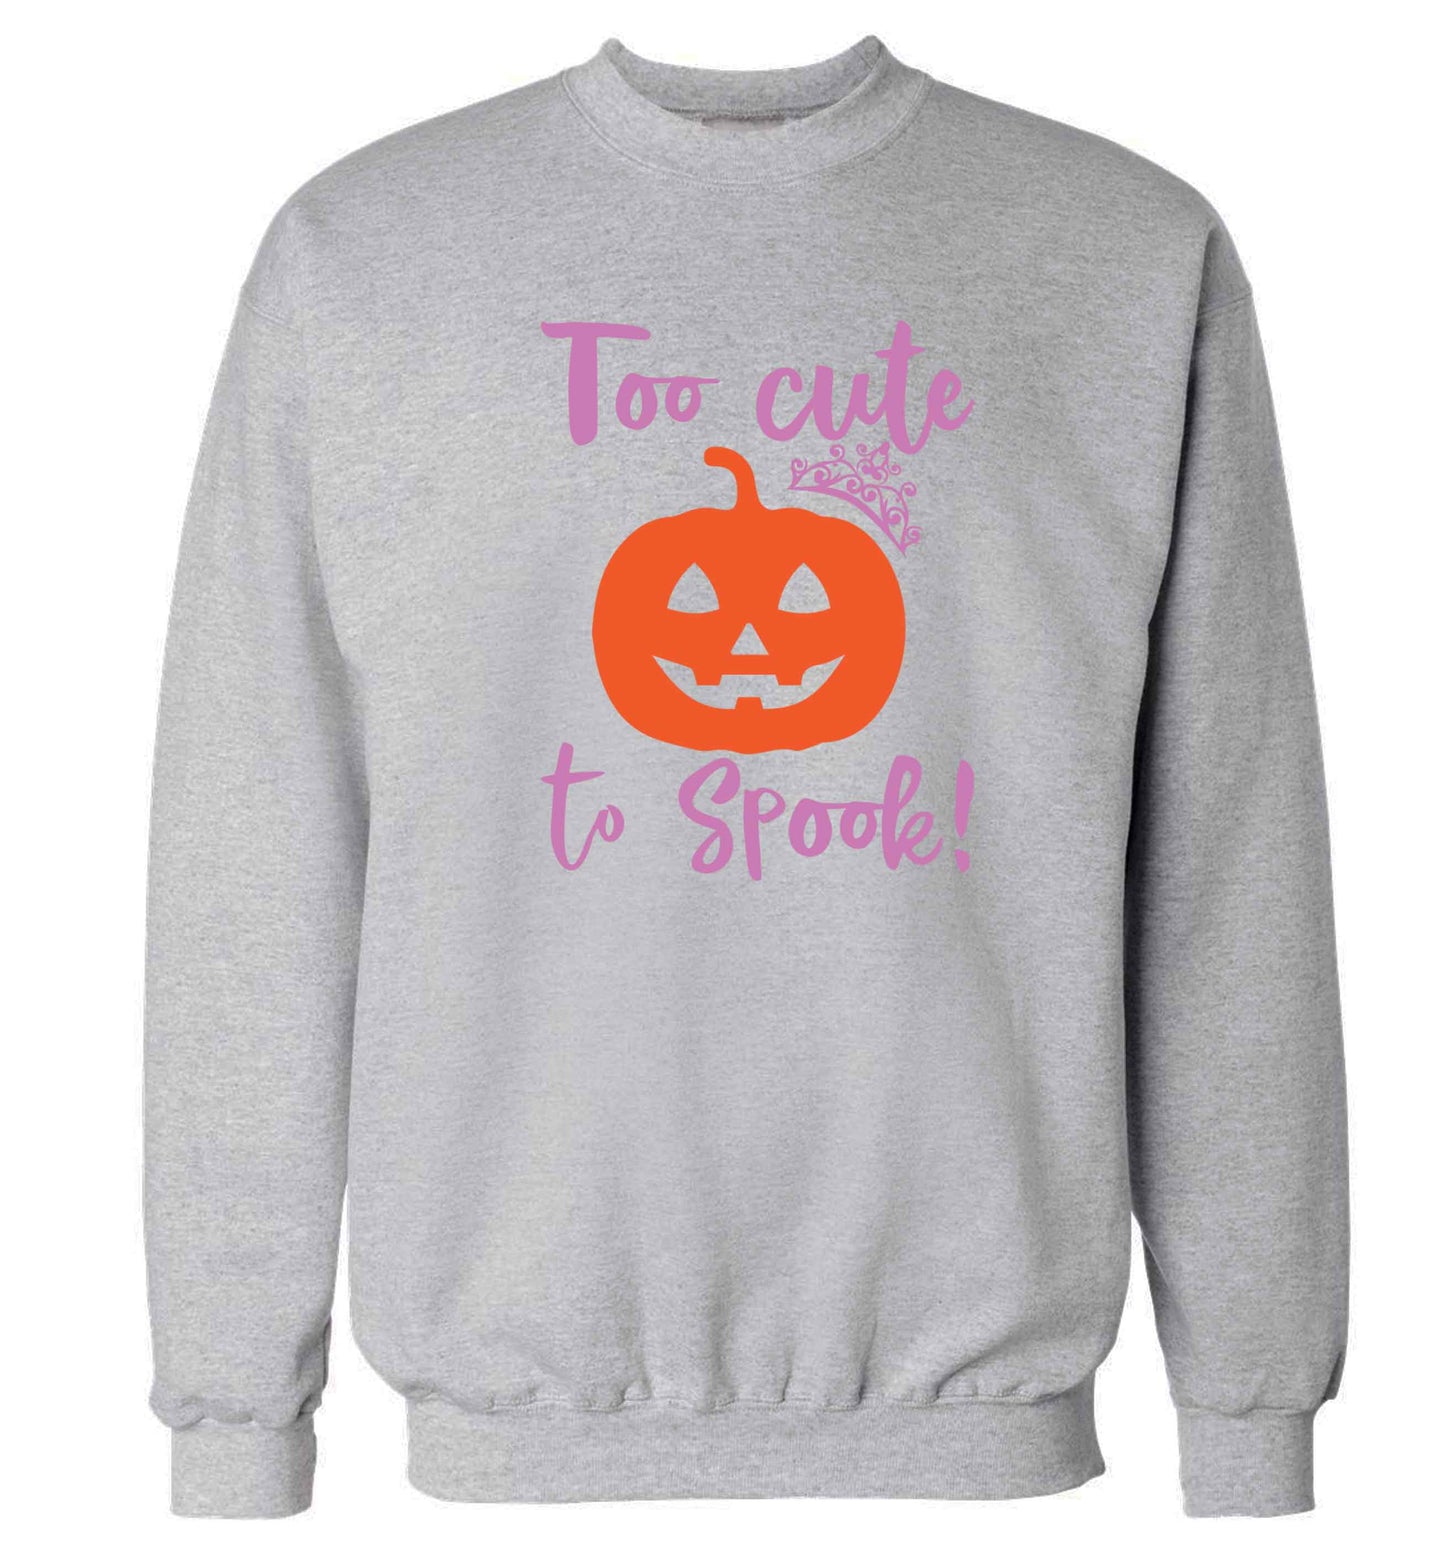 Too cute to spook! Adult's unisex grey Sweater 2XL